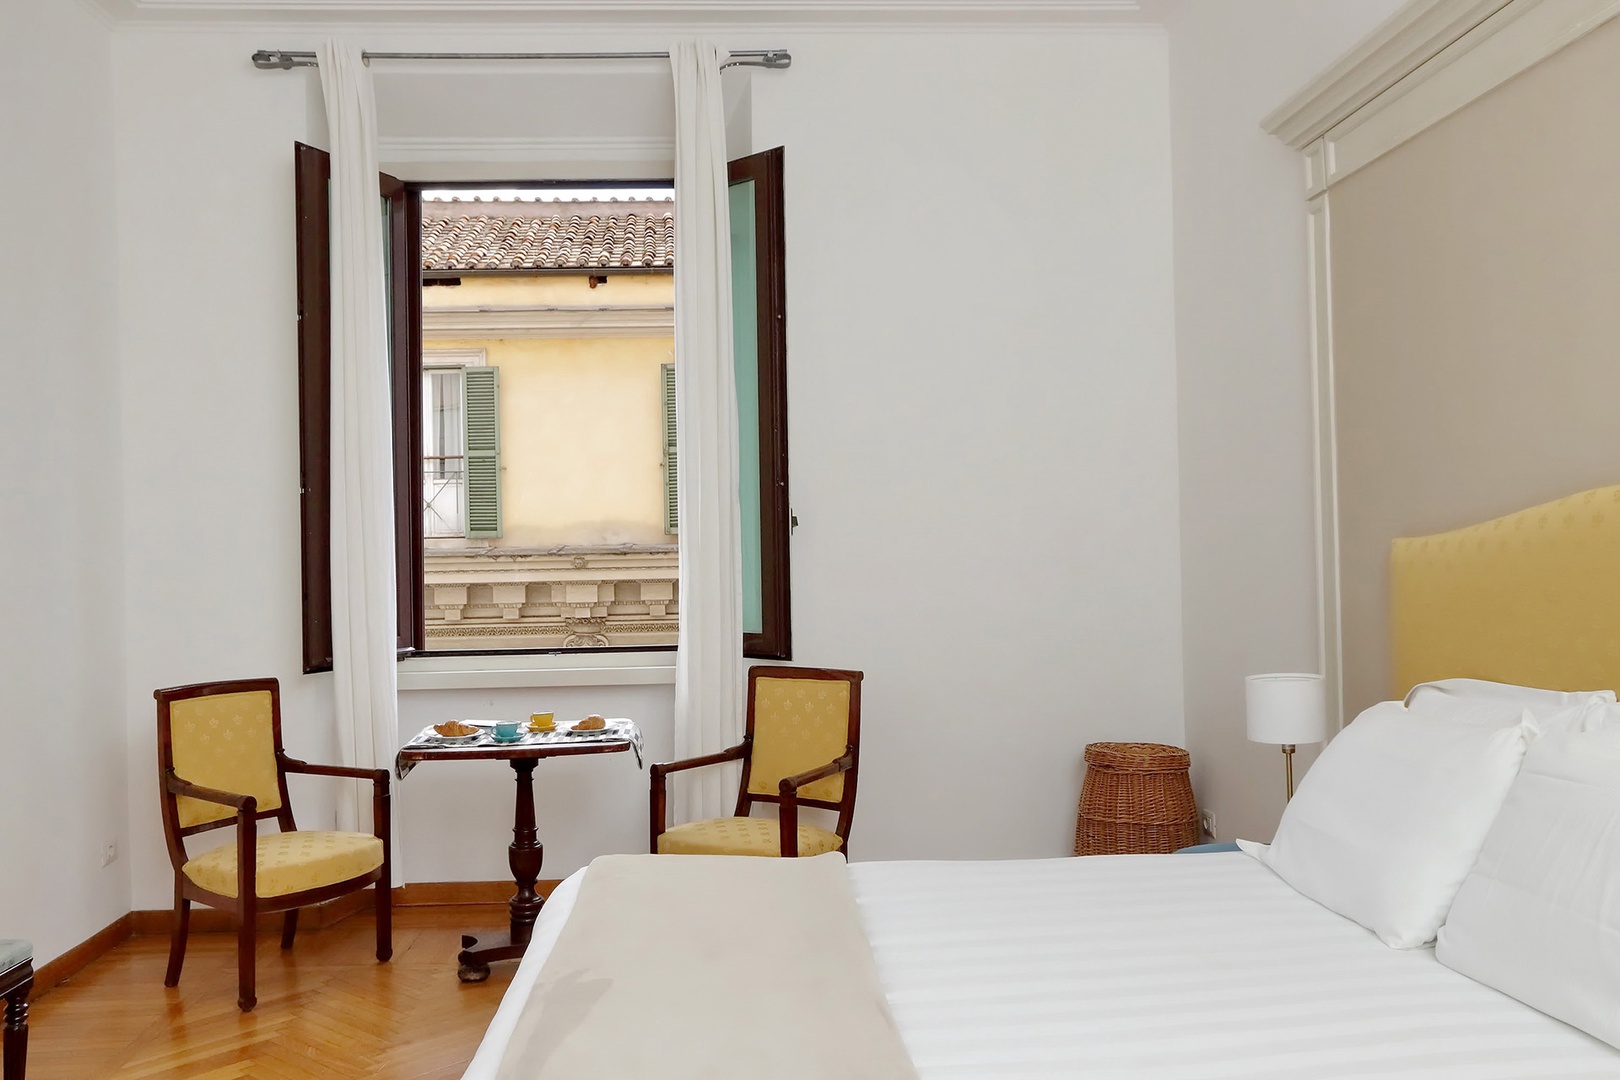 Enjoy a light breakfast and the sites of Rome from bedroom 1